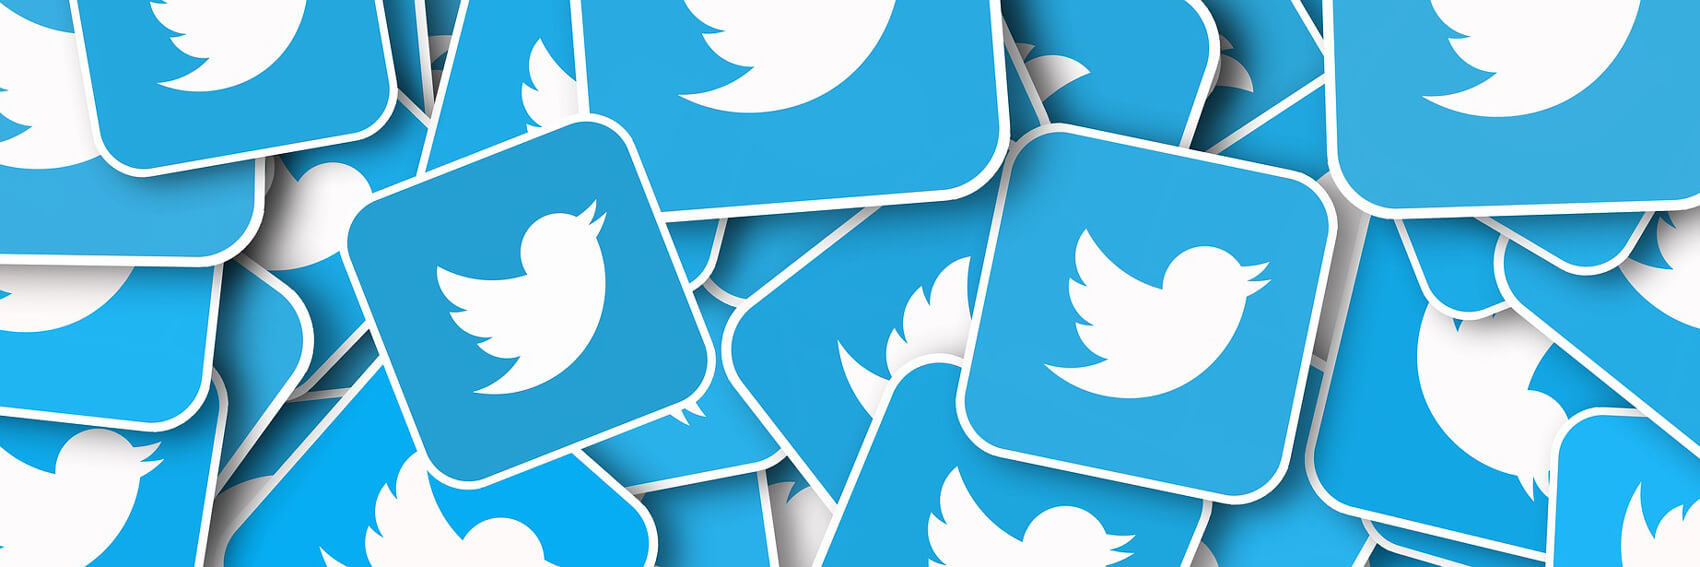 Twitter marketing tips: top 3 changes for 2016